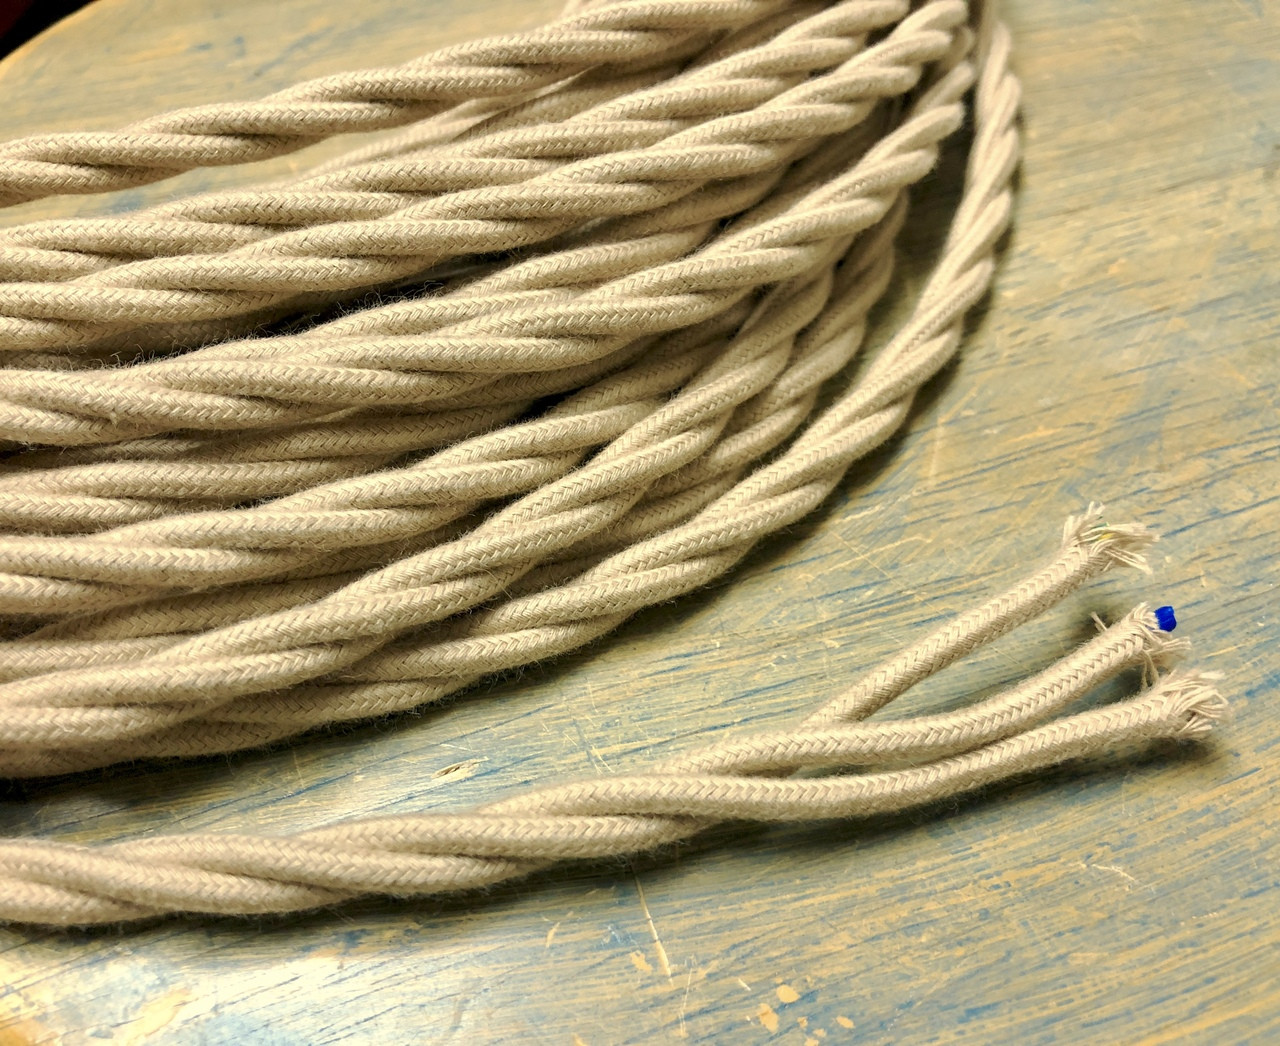 Twisted 3-Wire Cloth Covered Cord 18ga Vintage Antique Lights Rayon Beige Tan